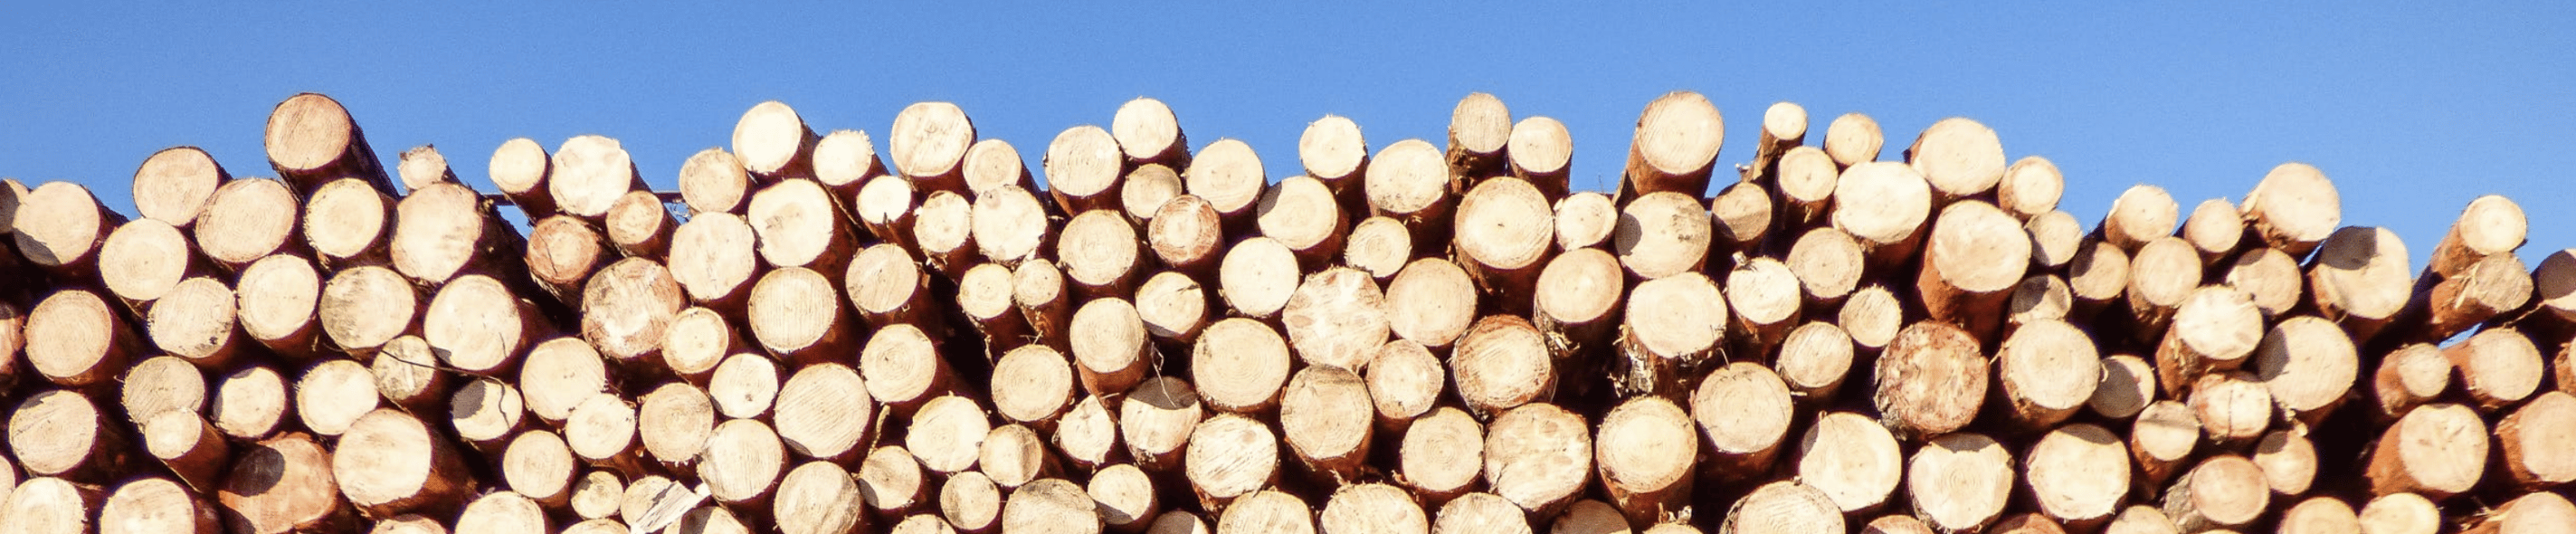 timber, wood, ecological forestry, ecology, environment, wooden, logs, forestry, forest, logs